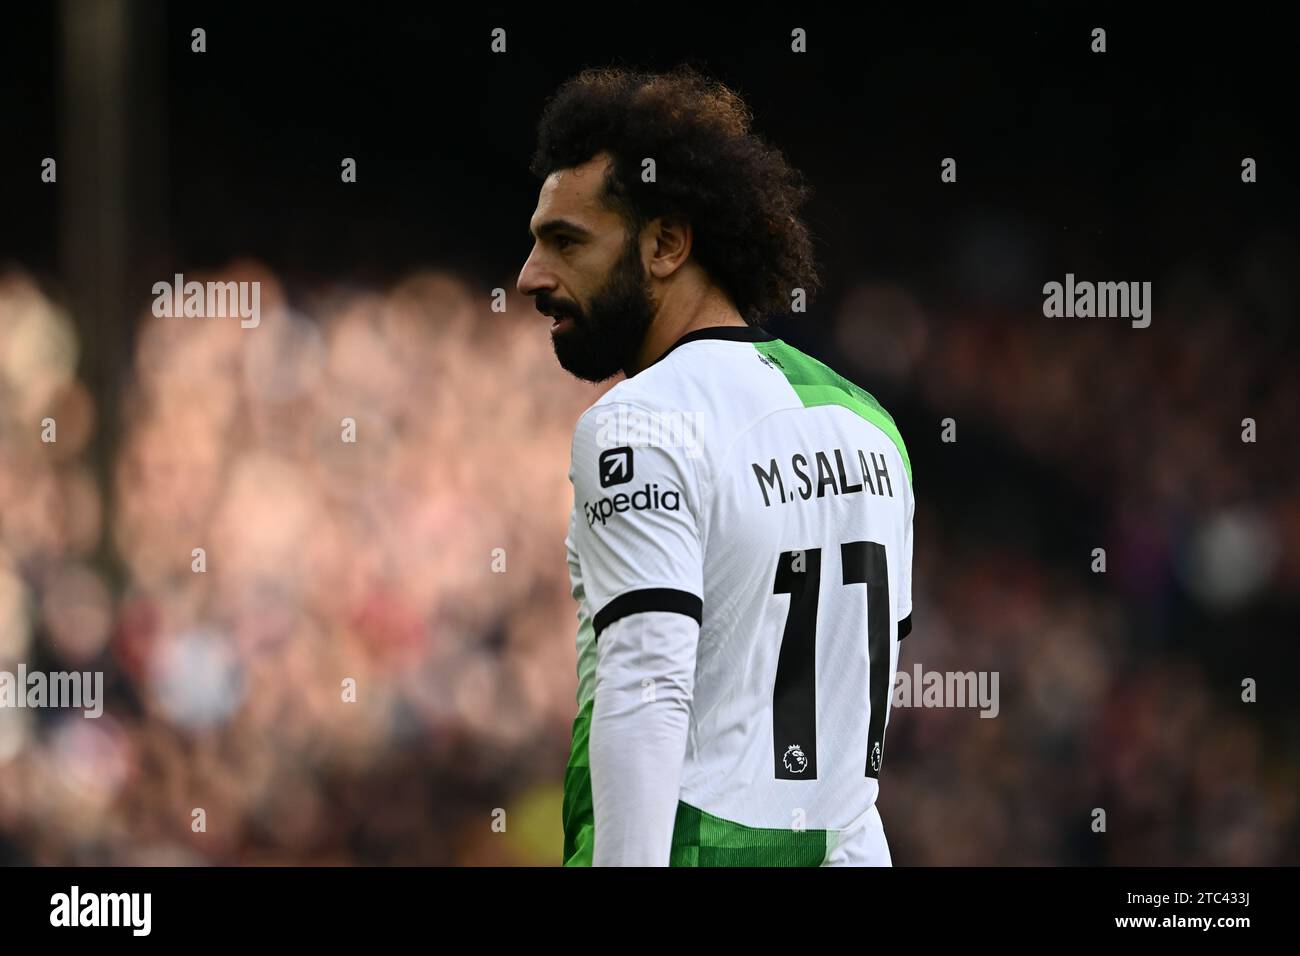 LONDON, ENGLAND - DECEMBER 9: Mohamed Salah of Liverpool FC during the Premier League match between Crystal Palace and Liverpool FC at Selhurst Park o Stock Photo